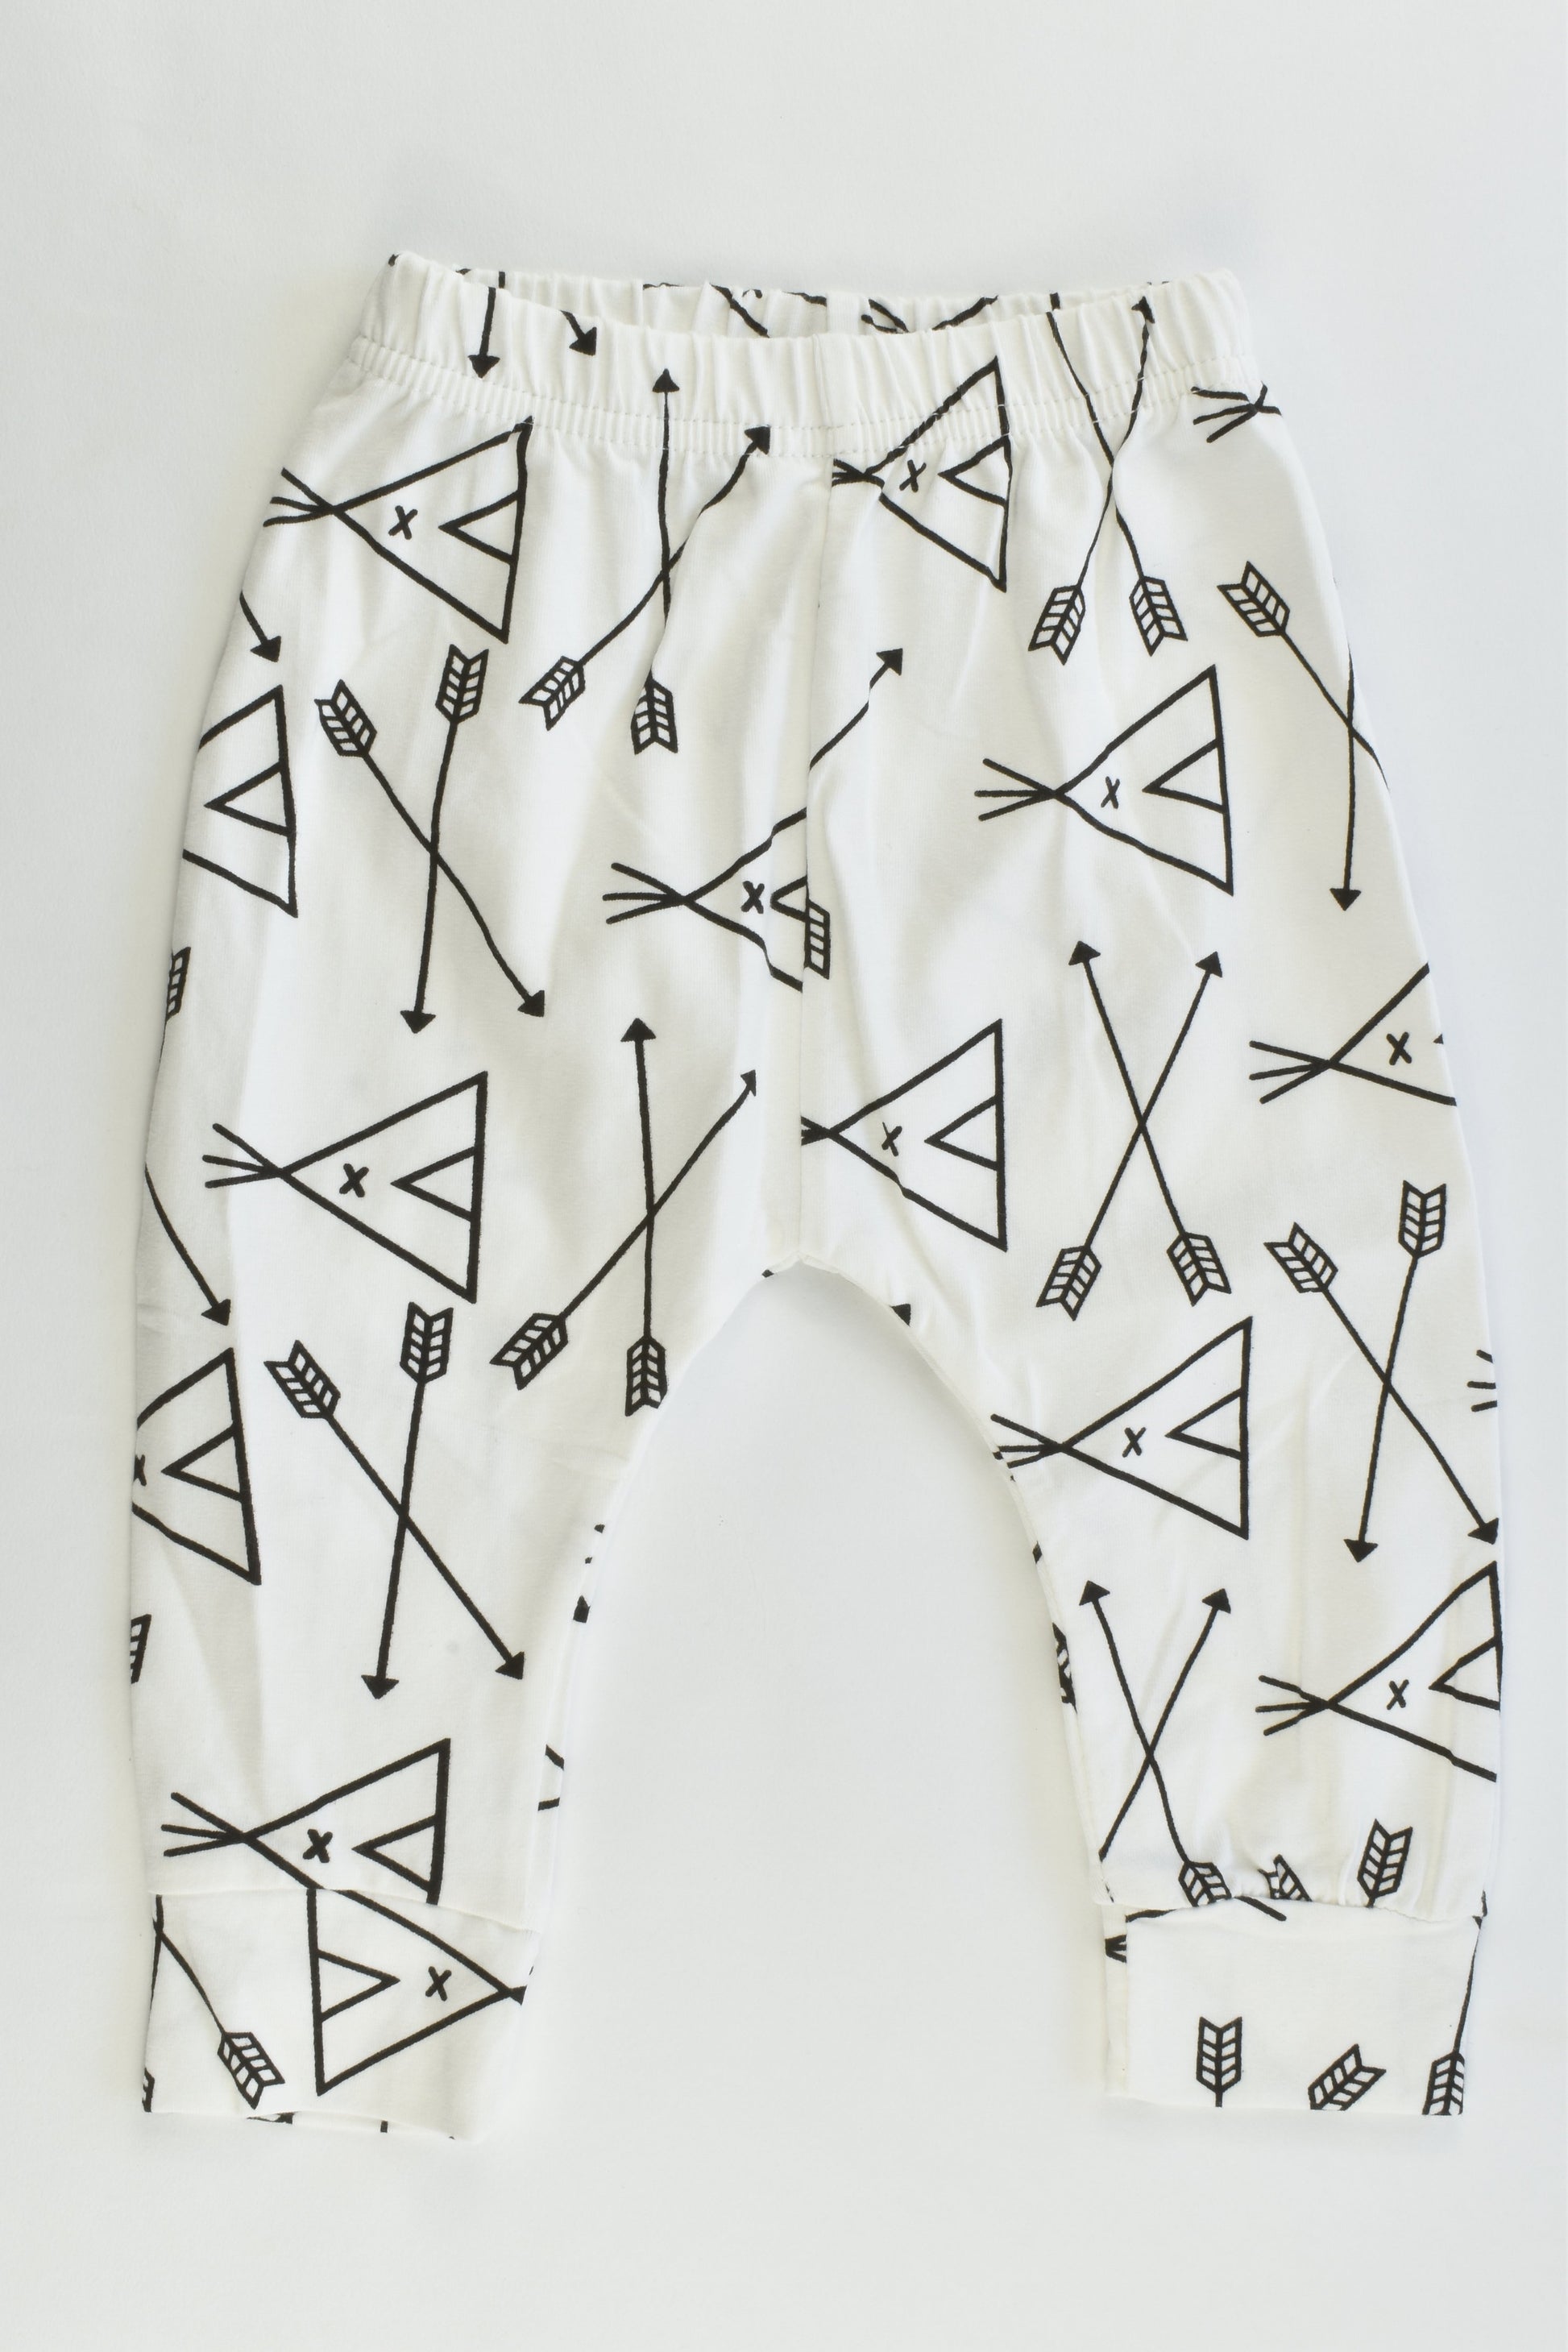 NEW Brand Unknown Size 80 cm (0-1) Teepee Baggy Pants